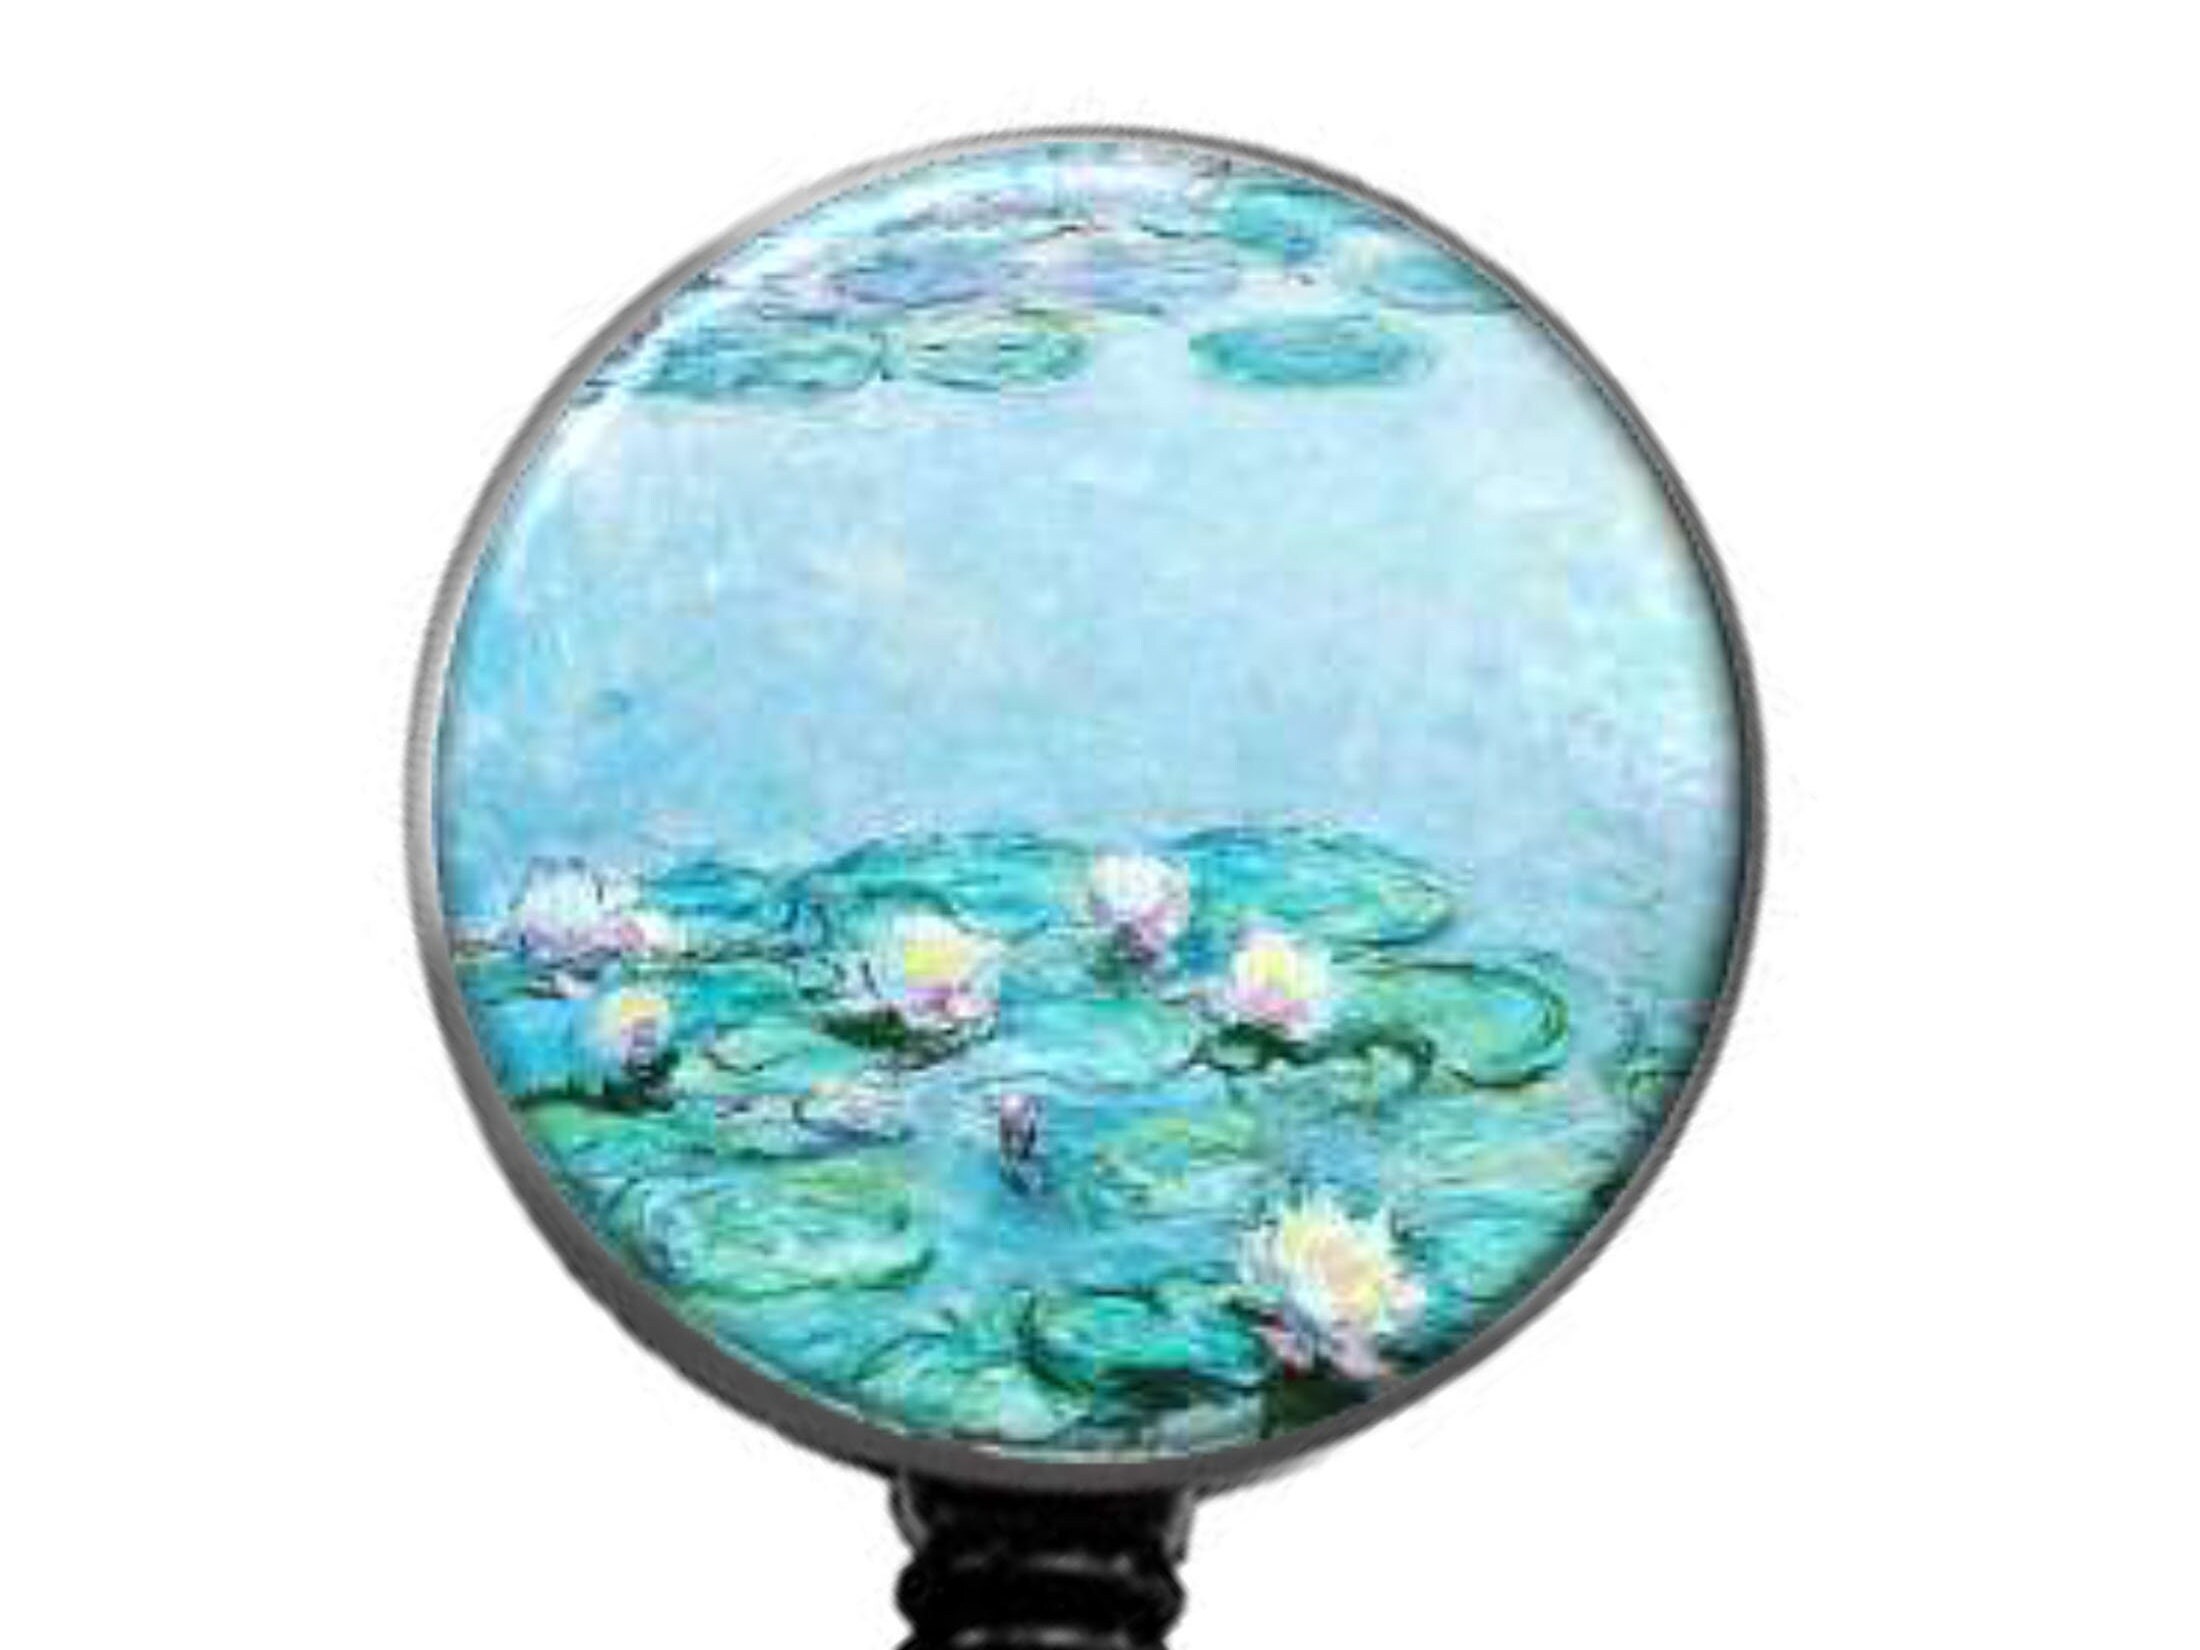 ID Badge Reel - Water Lily by Monet ID Badge Holder - Retractable ID Badge Reels - ID Holder for Educators Medical Personnel